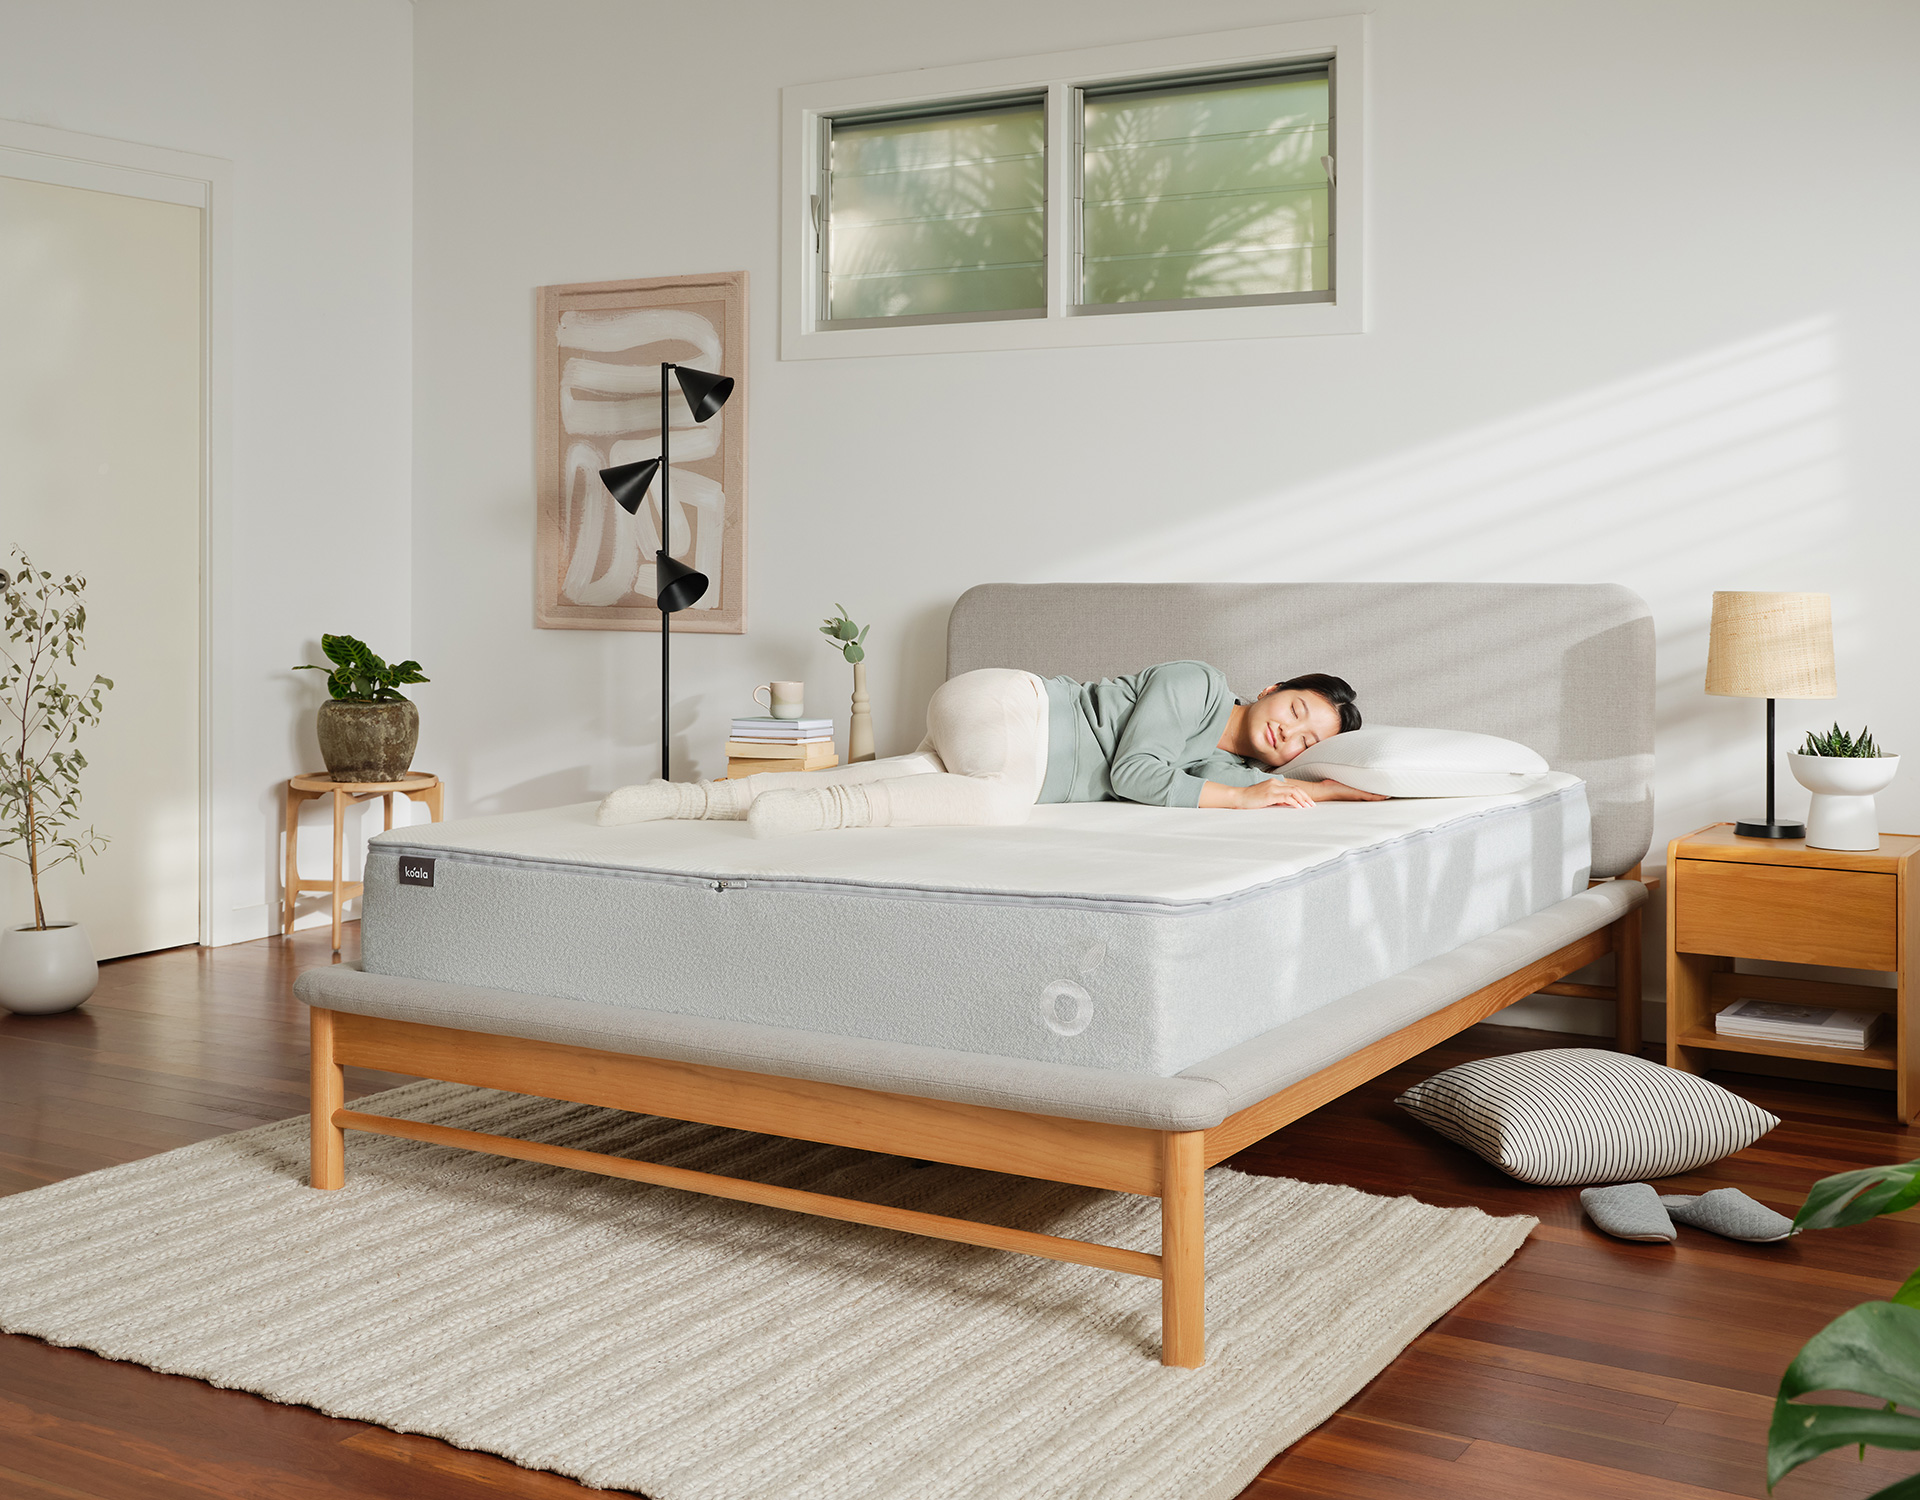 Woman sleeping comfortably on her Koala mattress, which is one of the best mattresses for side sleepers in Australia